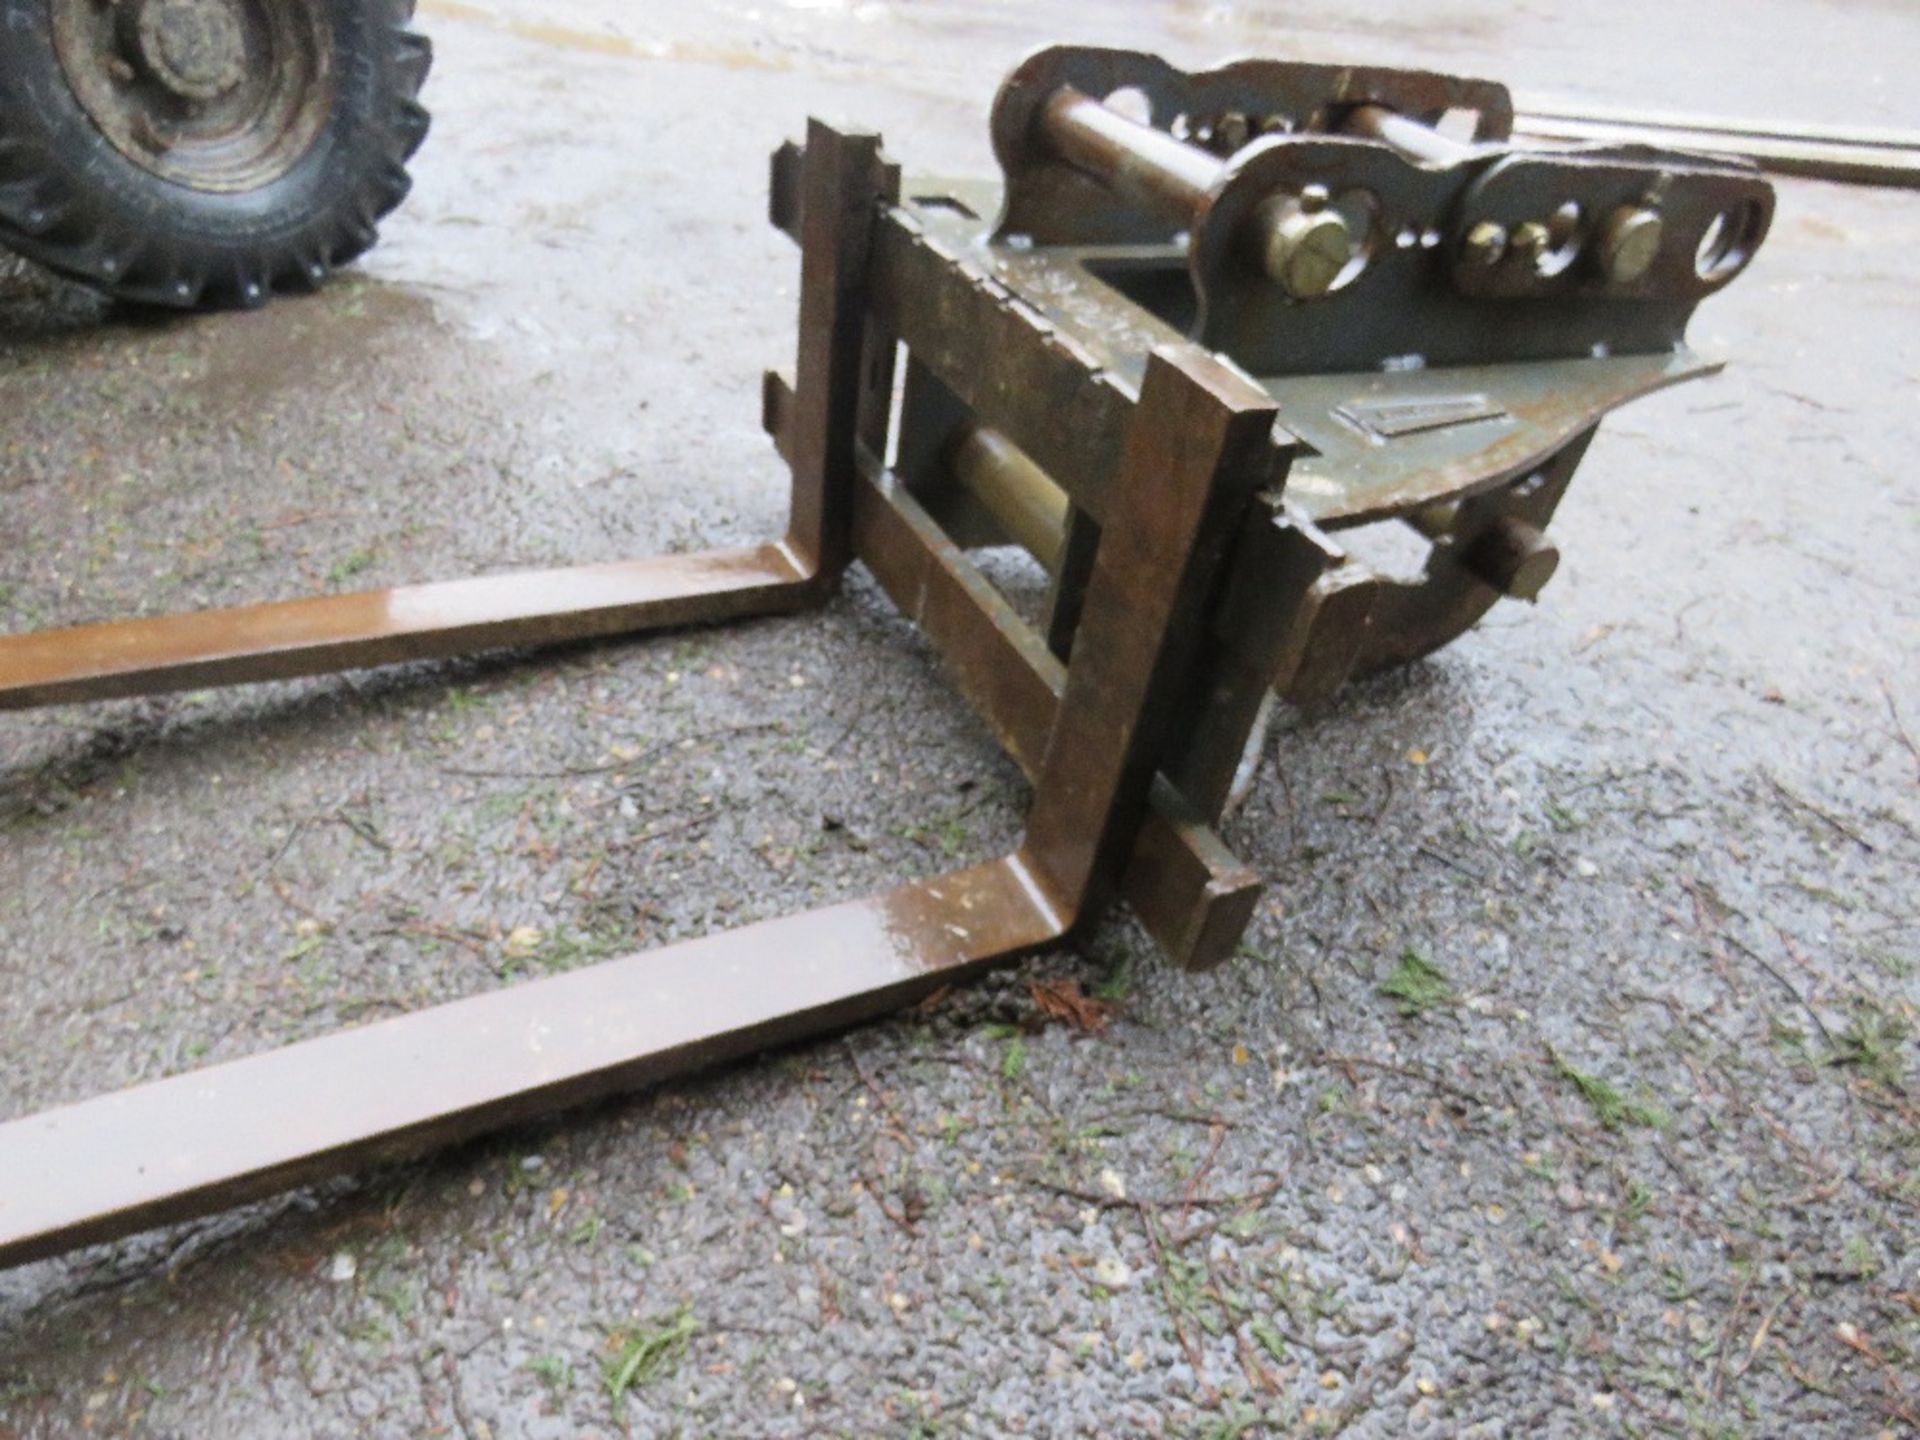 SET OF DROMORE PALLET FORKS FOR 13 TONNE EXCAVATOR, 65MM PINS, DIRECT EX LOCAL COMPANY, UNTESTED - Image 4 of 5